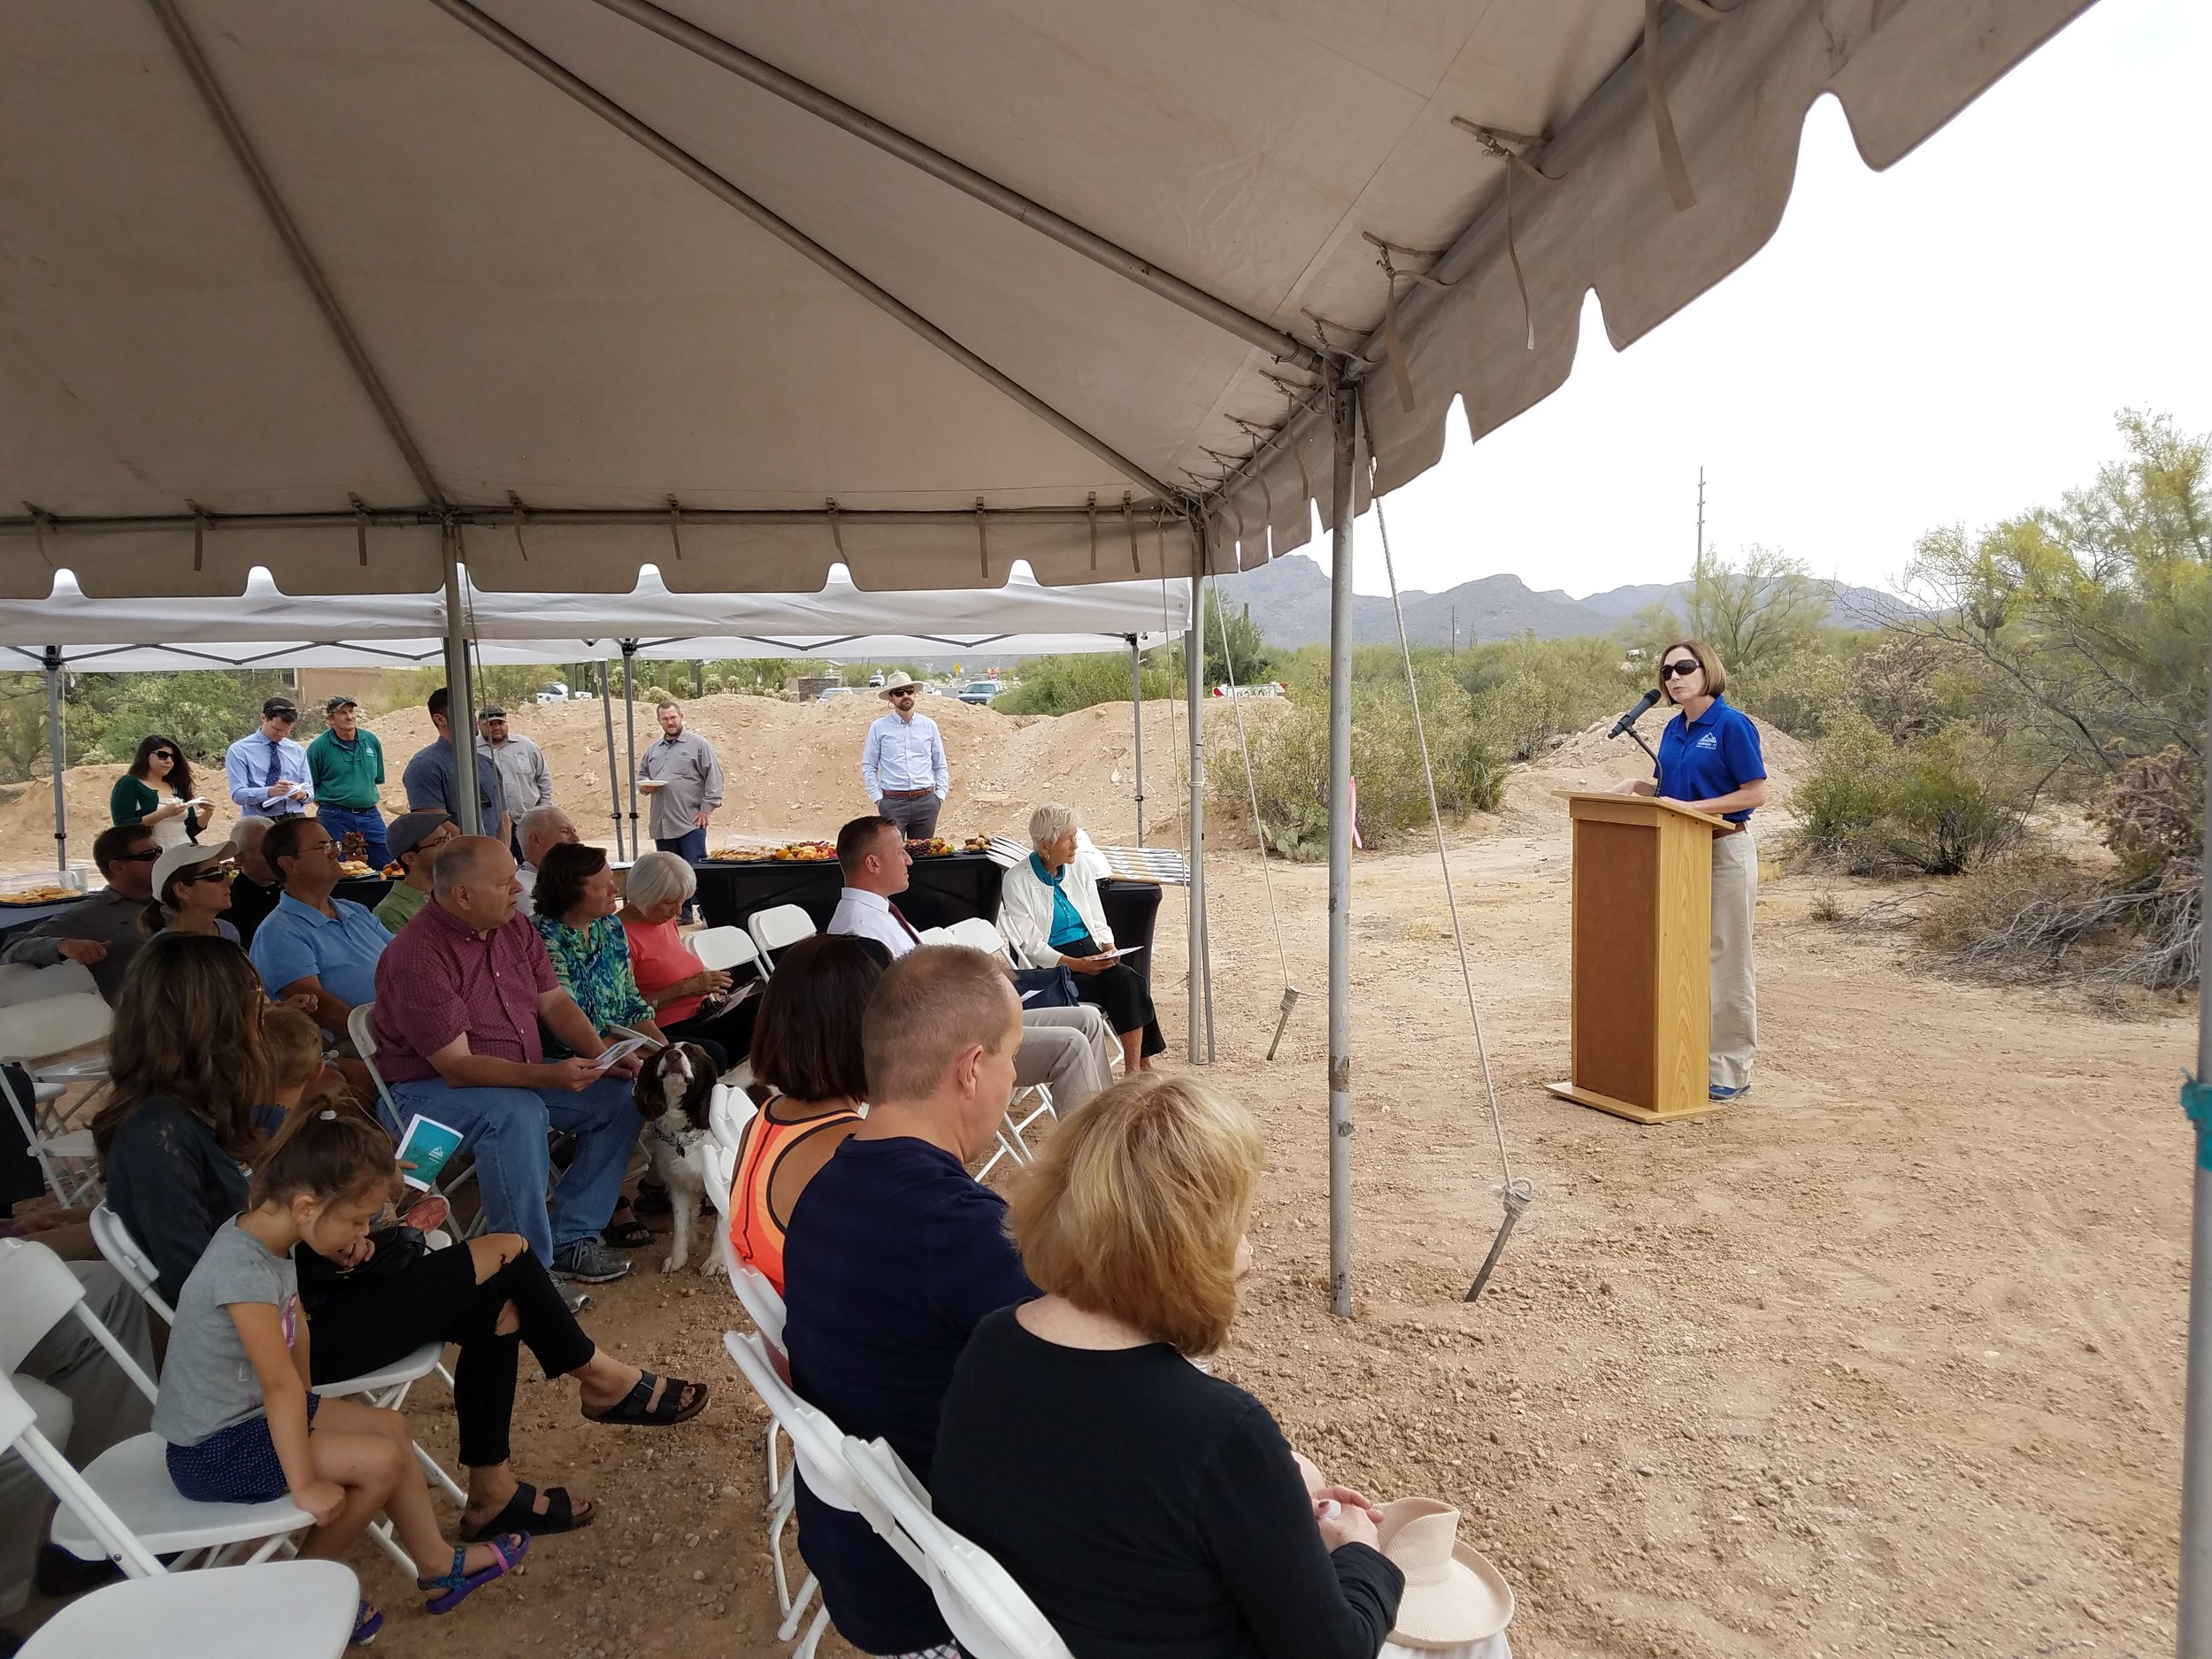  Parks and Recreation Director Cynthia Nemeth-Briehn describes the planning process for the new Tangerine Sky Park 